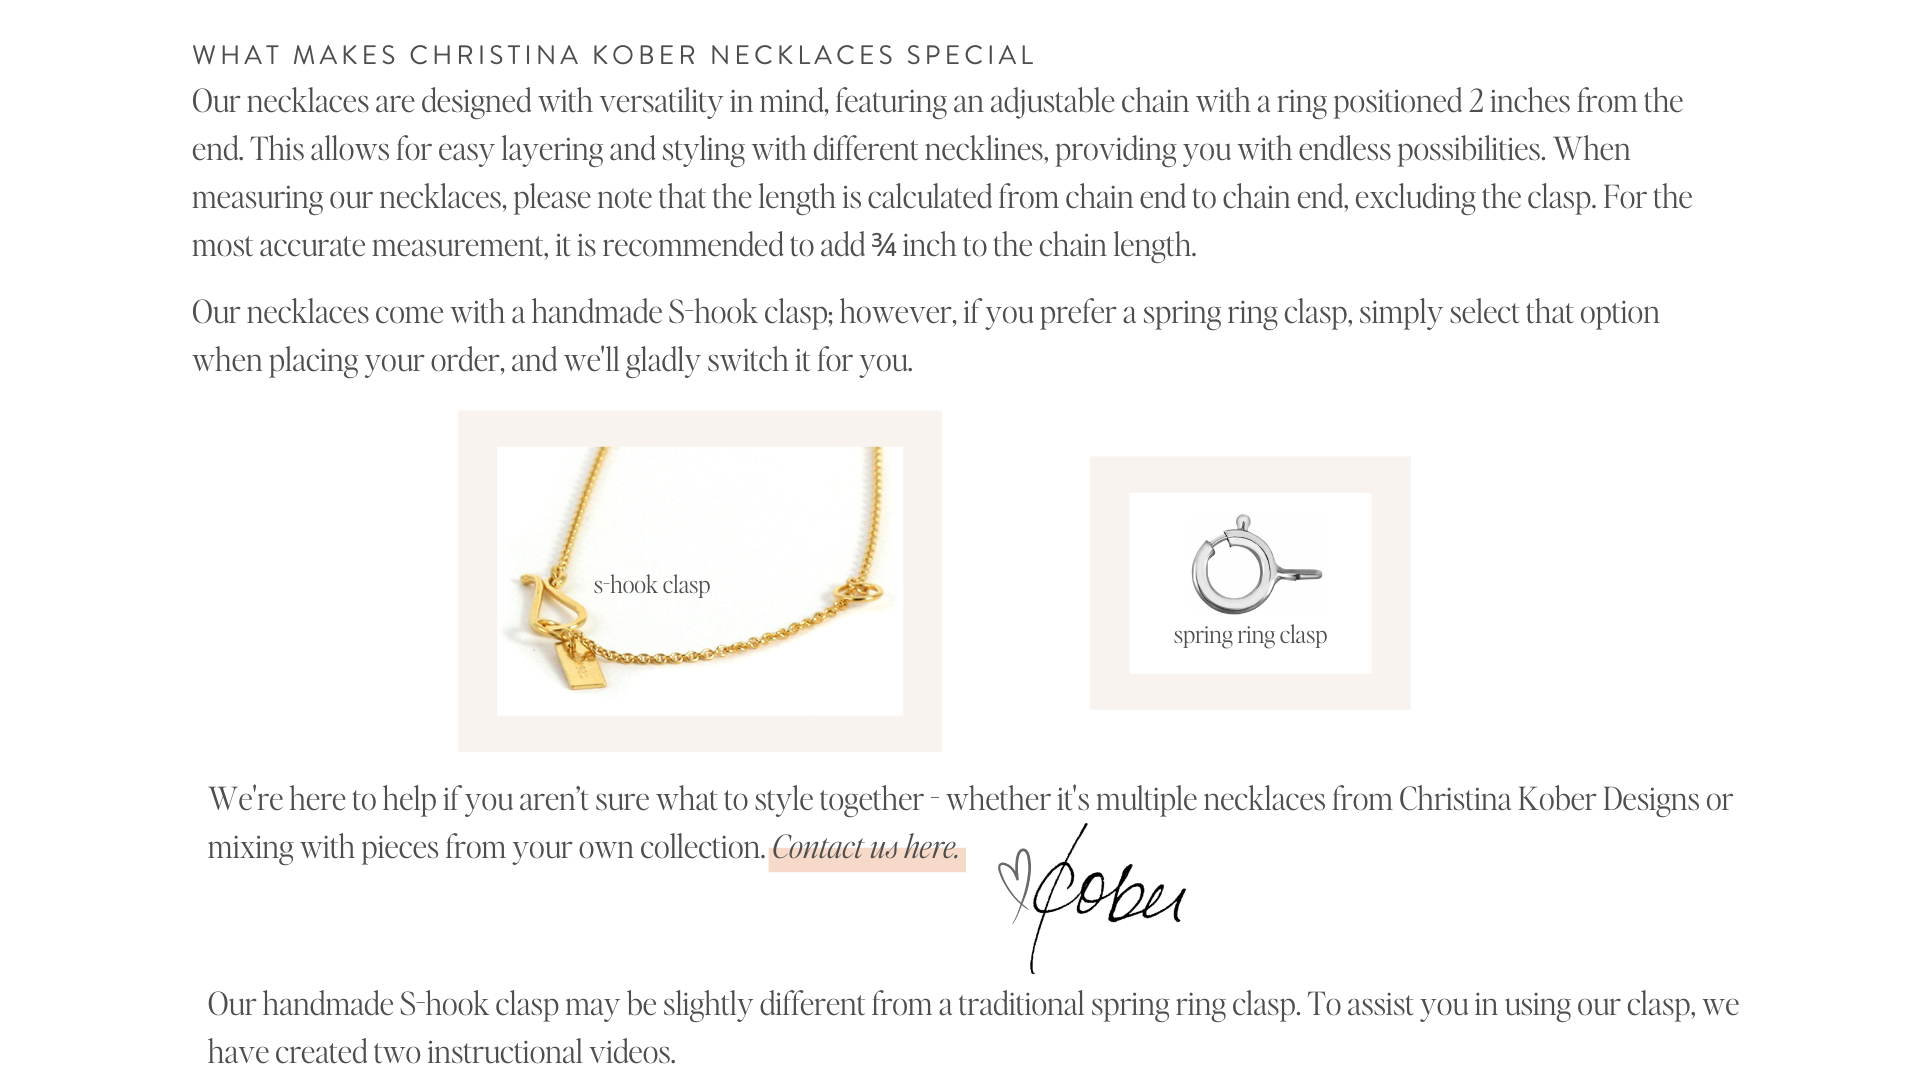 WHAT makes christina kober necklaces special Our necklaces are designed with versatility in mind, featuring an adjustable chain with a ring positioned 2 inches from the end. This allows for easy layering and styling with different necklines, providing you with endless possibilities. When measuring our necklaces, please note that the length is calculated from chain end to chain end, excluding the clasp. For the most accurate measurement, it is recommended to add ¾ inch to the chain length.   Our necklaces come with a handmade S-hook clasp; however, if you prefer a spring ring clasp, simply select that option when placing your order, and we'll gladly switch it for you.  We're here to help if you aren’t sure what to style together - whether it's multiple necklaces from Christina Kober Designs or mixing with pieces from your own collection. Contact us here. love, christina kober  Our handmade S-hook clasp may be slightly different from a traditional spring ring clasp. To assist you in using our clasp, we have created two instructional videos.